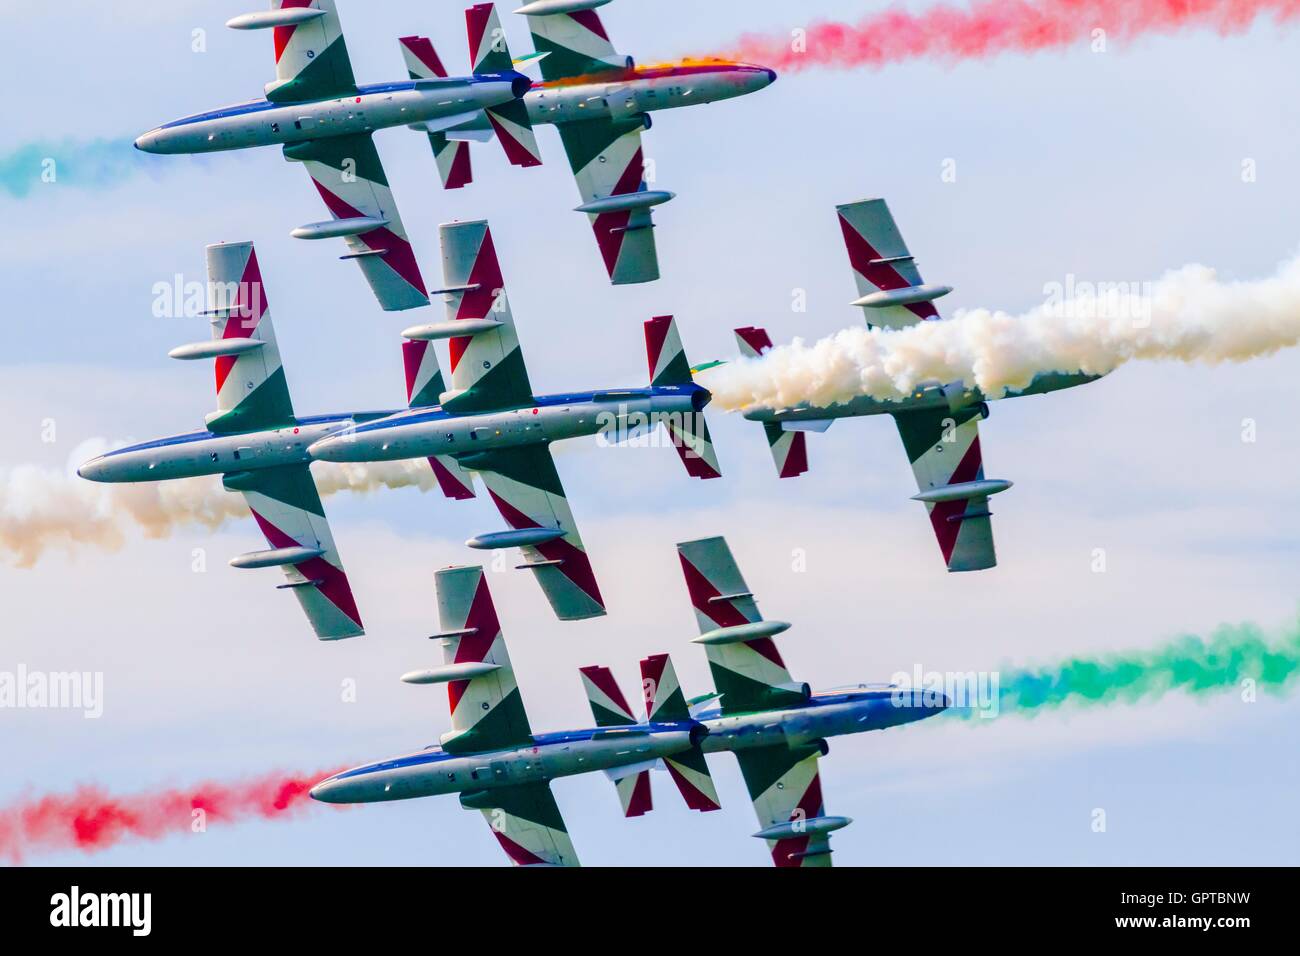 Frecce tricolori national Italian aerobatic group dangerous risky crossing during Airpower Zeltweg 2016 airshow in Austria perfect timing moment Stock Photo